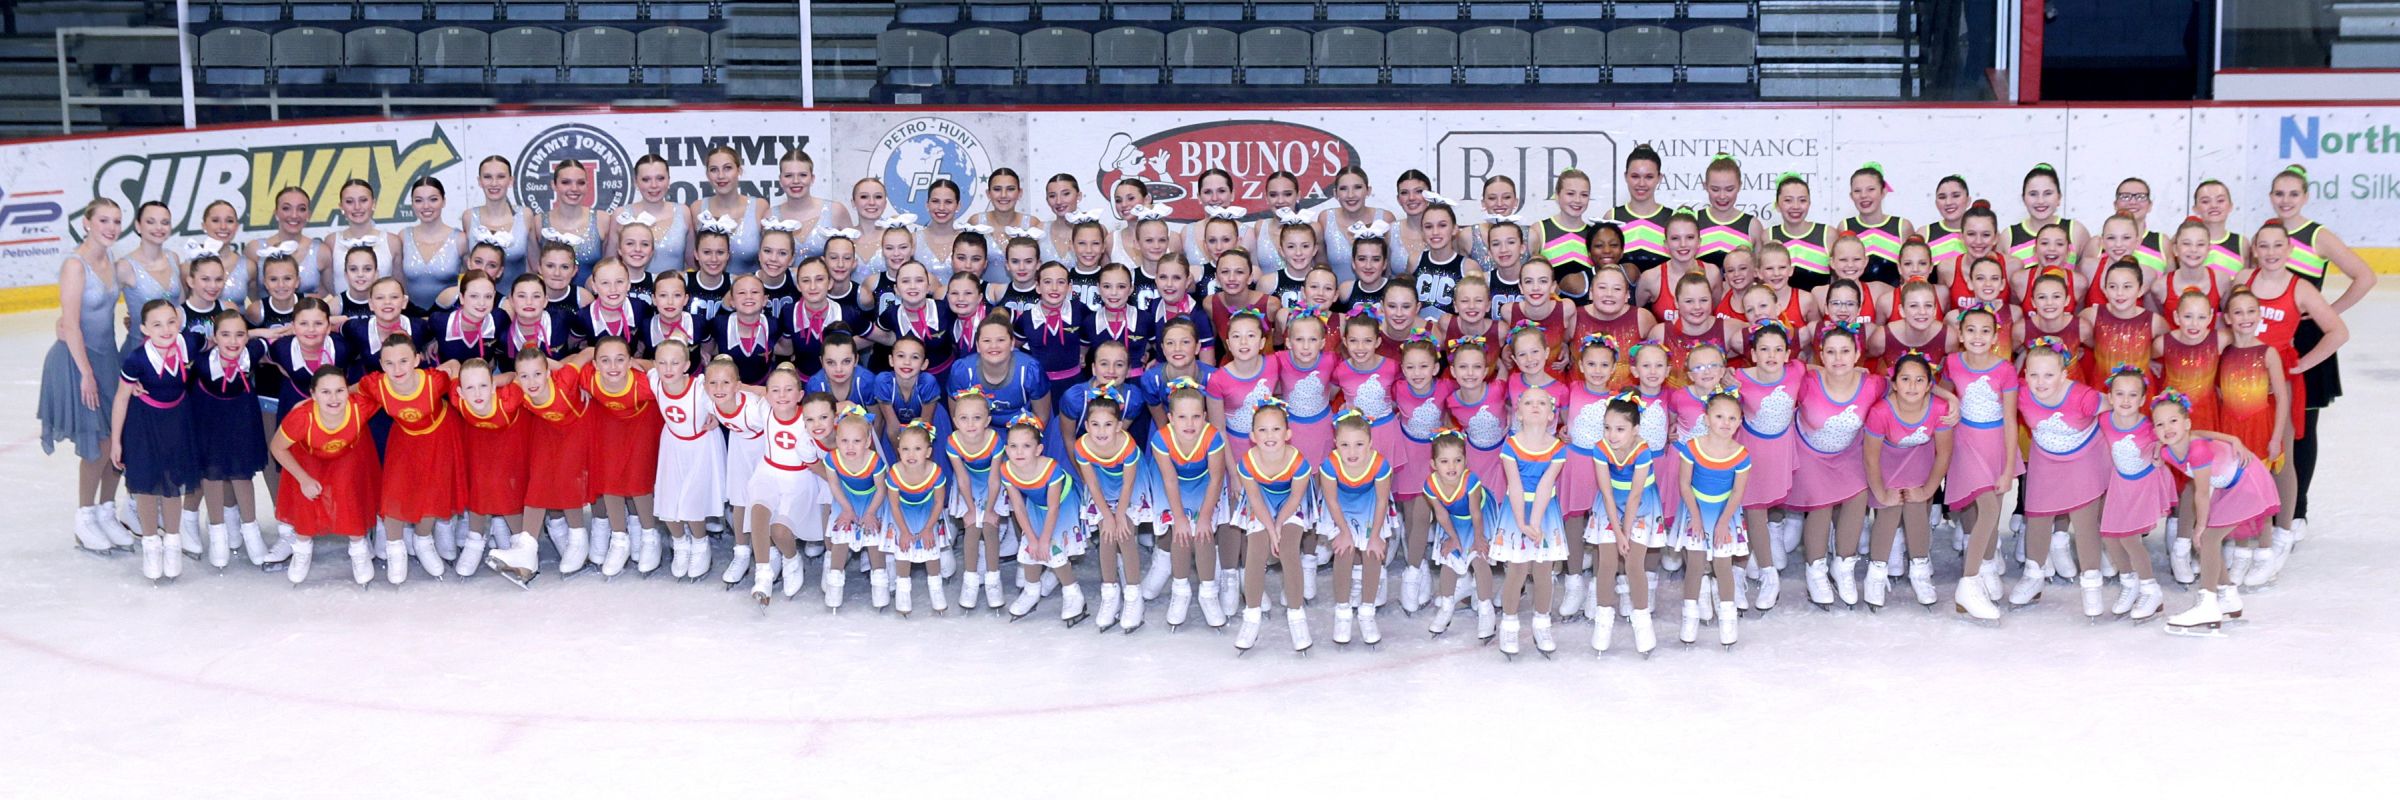 WELCOME TO CAPITAL ICE SYNCHRO